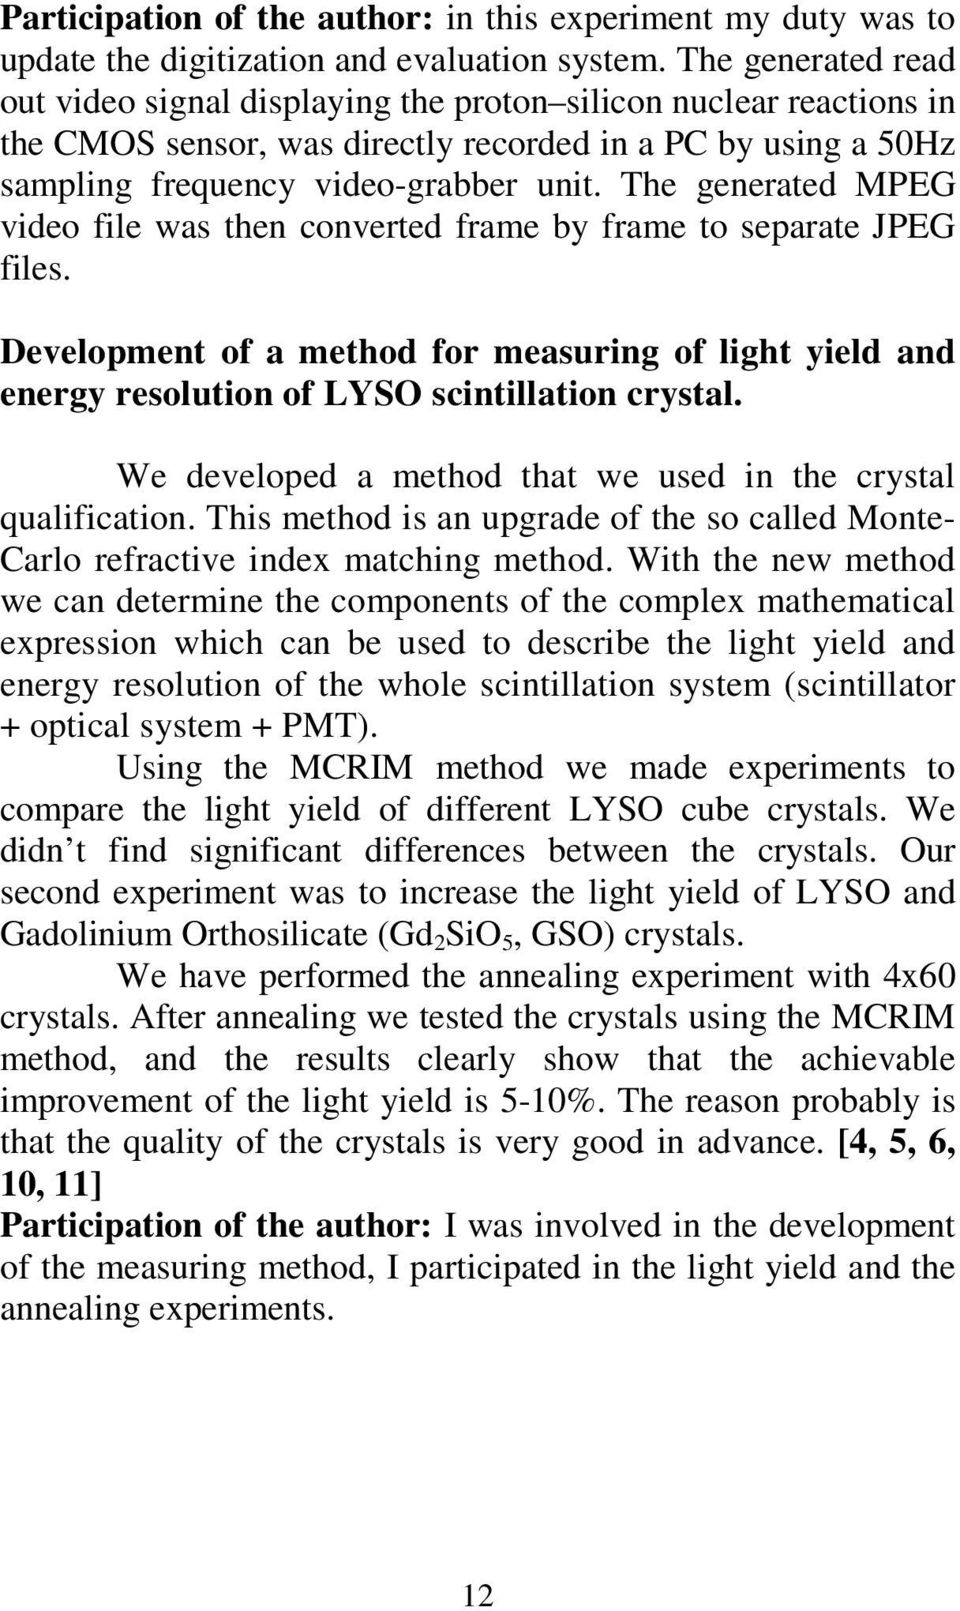 The generated MPEG video file was then converted frame by frame to separate JPEG files. Development of a method for measuring of light yield and energy resolution of LYSO scintillation crystal.